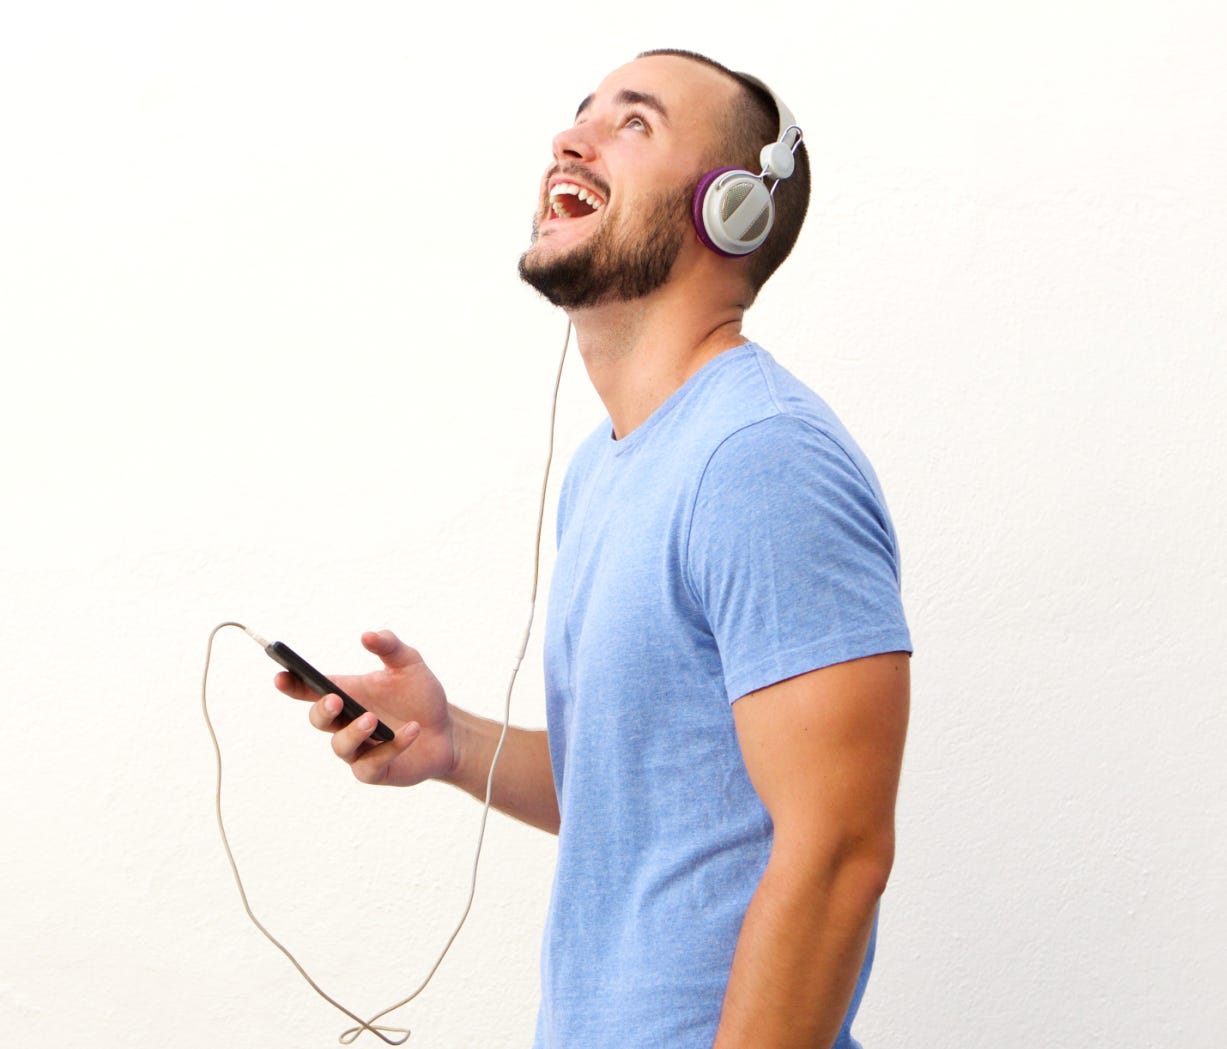 Streaming music on your cell phone can eat up a lot of data from your plan.